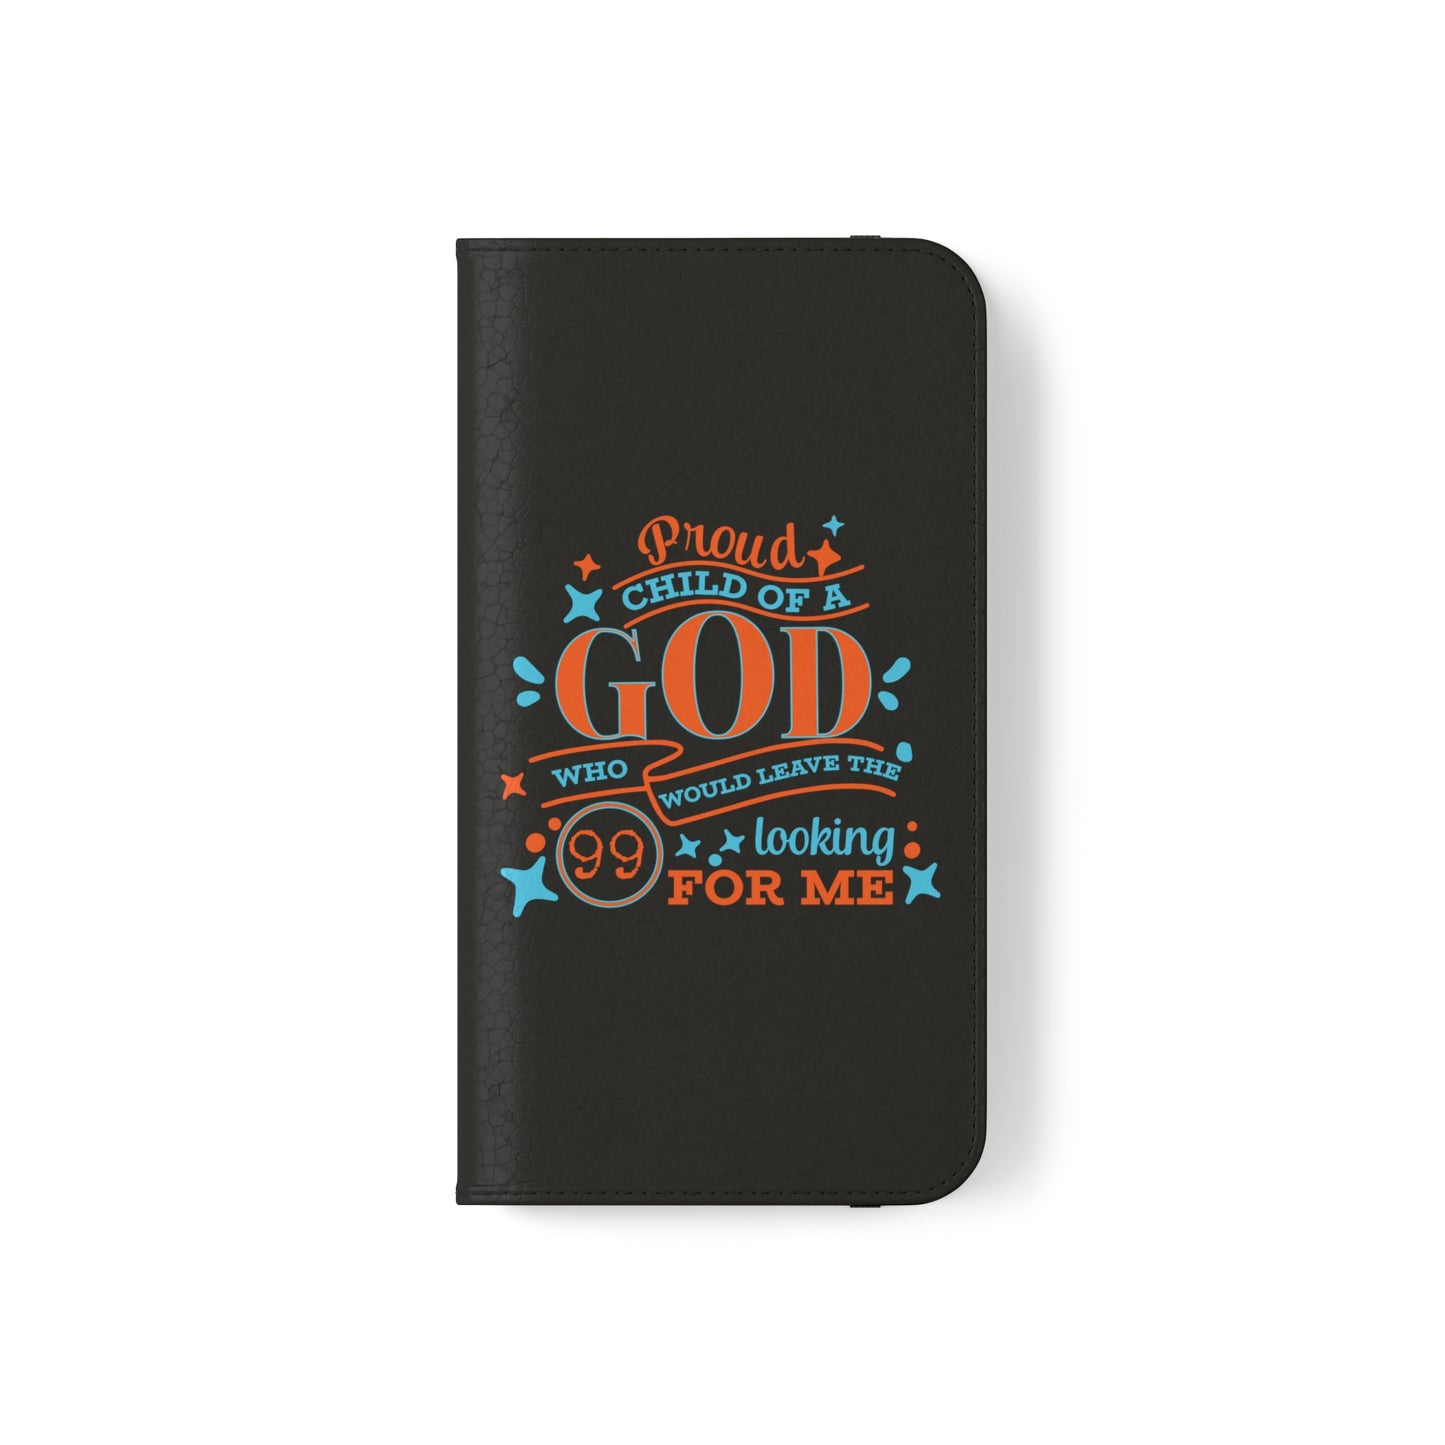 Prould Child Of A God Who Would Leave The 99 Looking For Me Phone Flip Cases